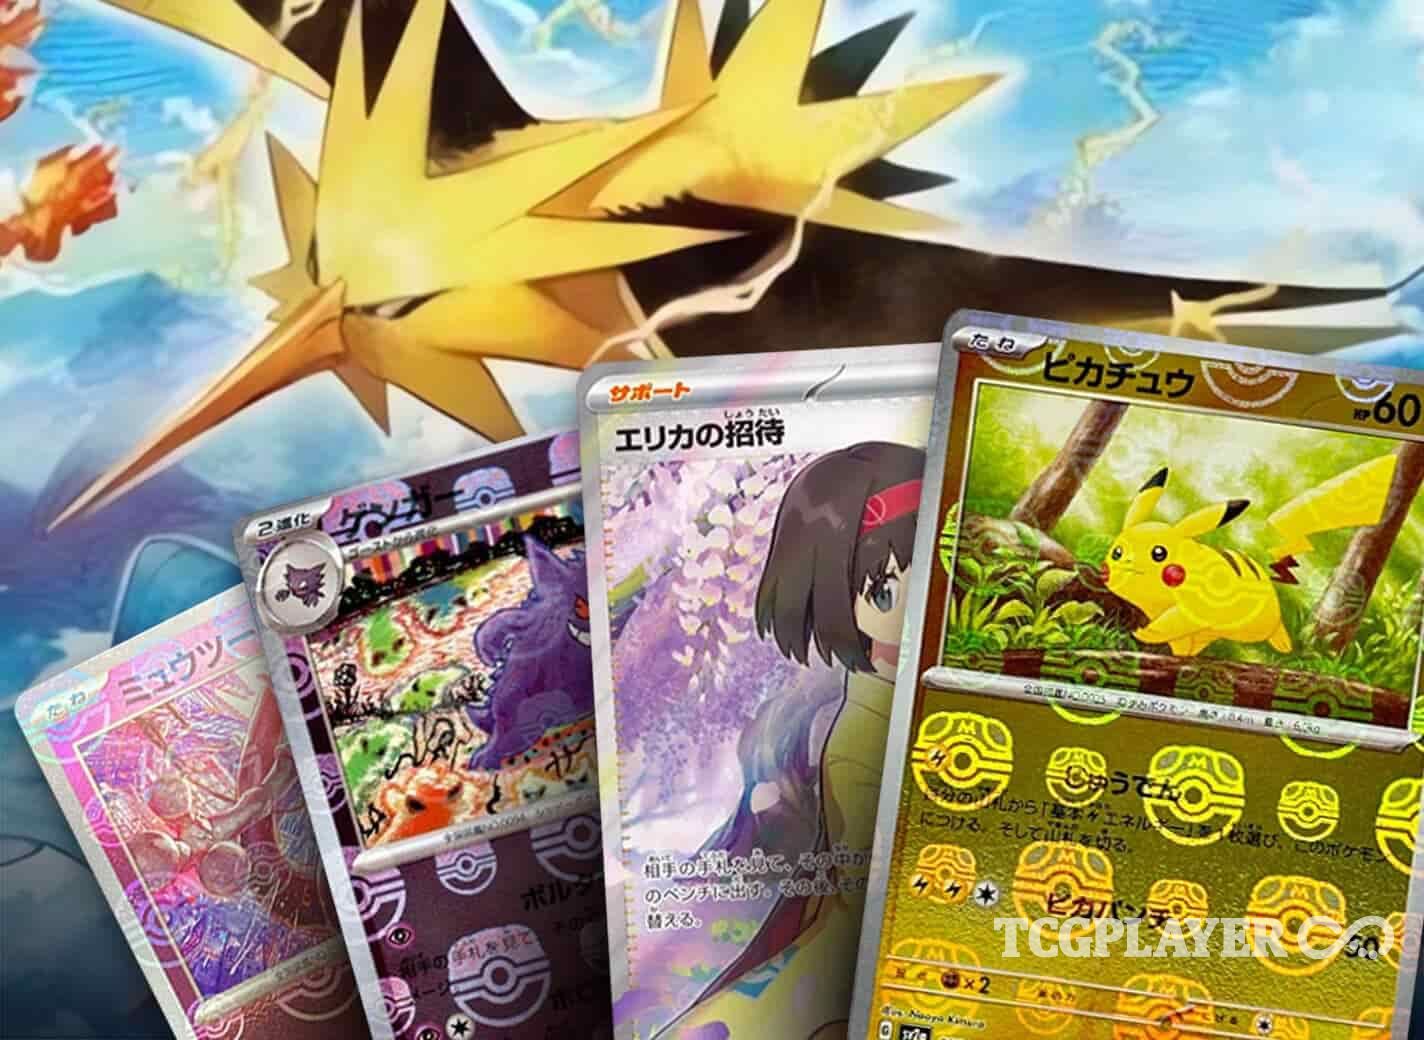 The Most Expensive Cards You Can Find in Pokémon Card 151 [SV2a]